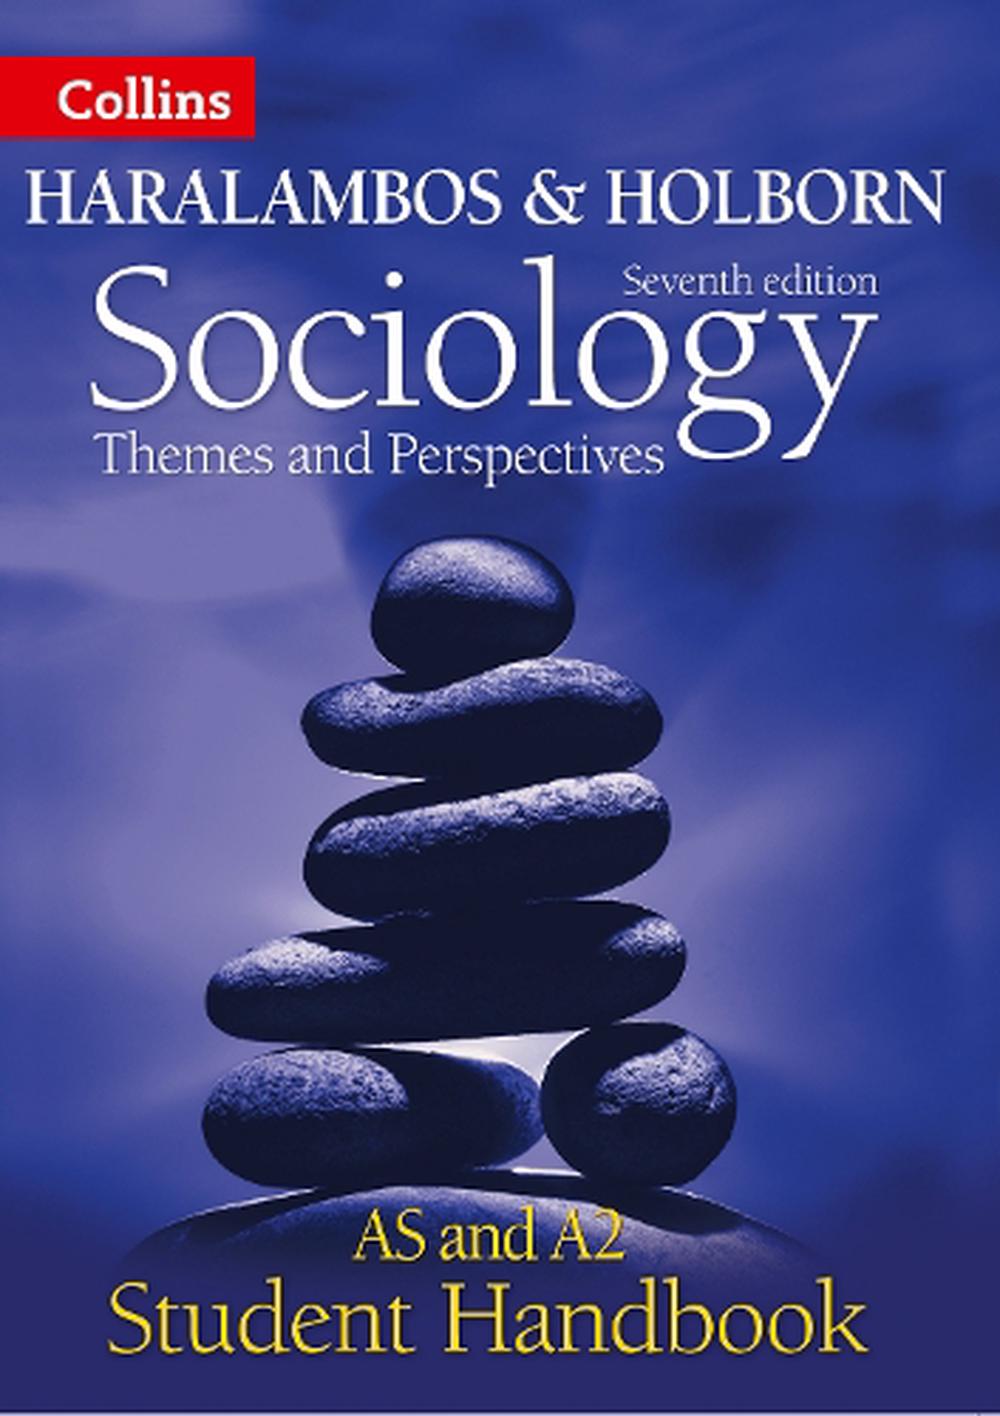 Sociology Themes and Perspectives Student Handbook As and A2 Level by Martin Ho 9780007310722